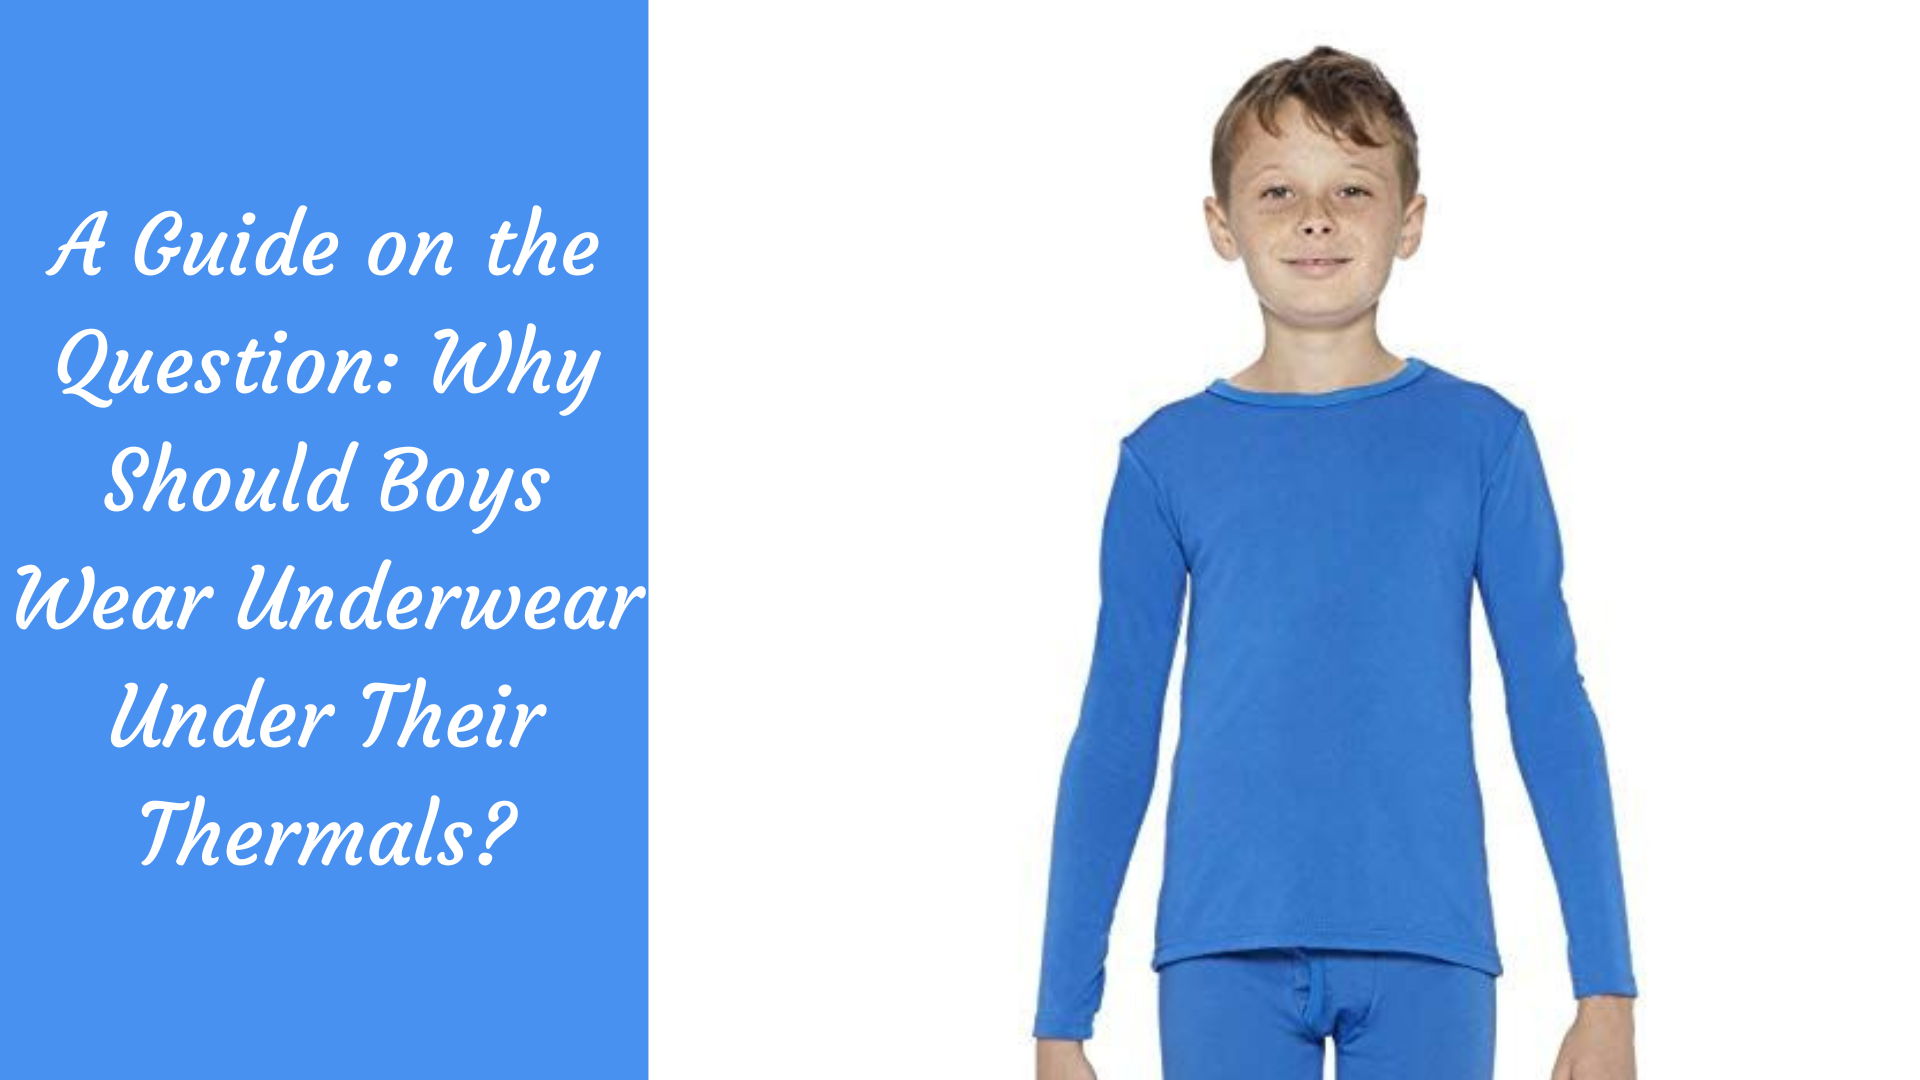 A Guide on the Question: Why Should Boys Wear Underwear Under